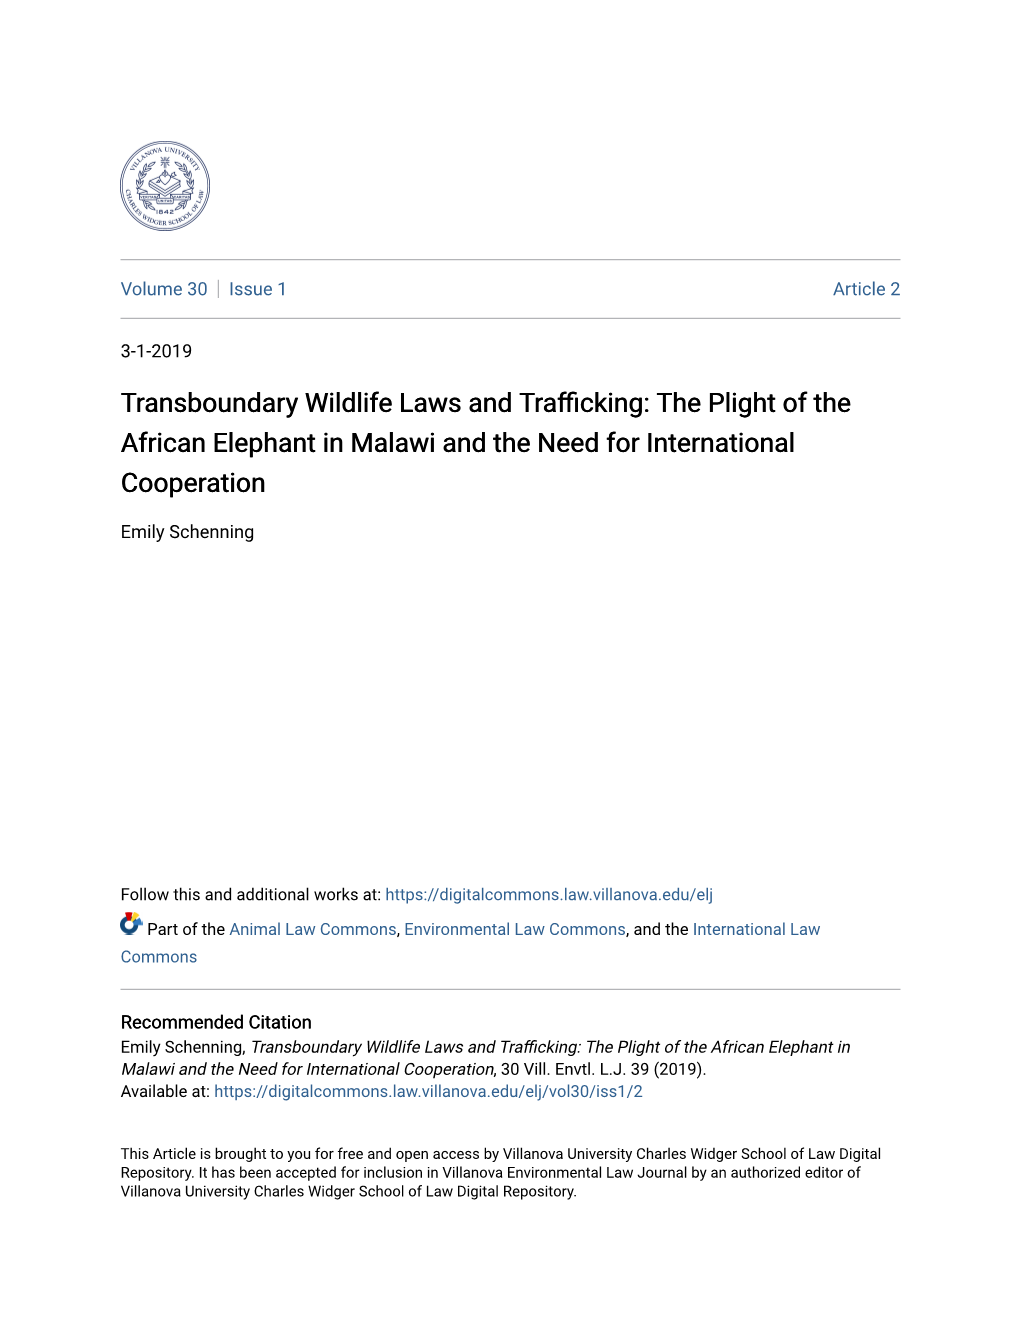 Transboundary Wildlife Laws and Trafficking: the Plight of the African Elephant in Malawi and the Need for International Cooperation